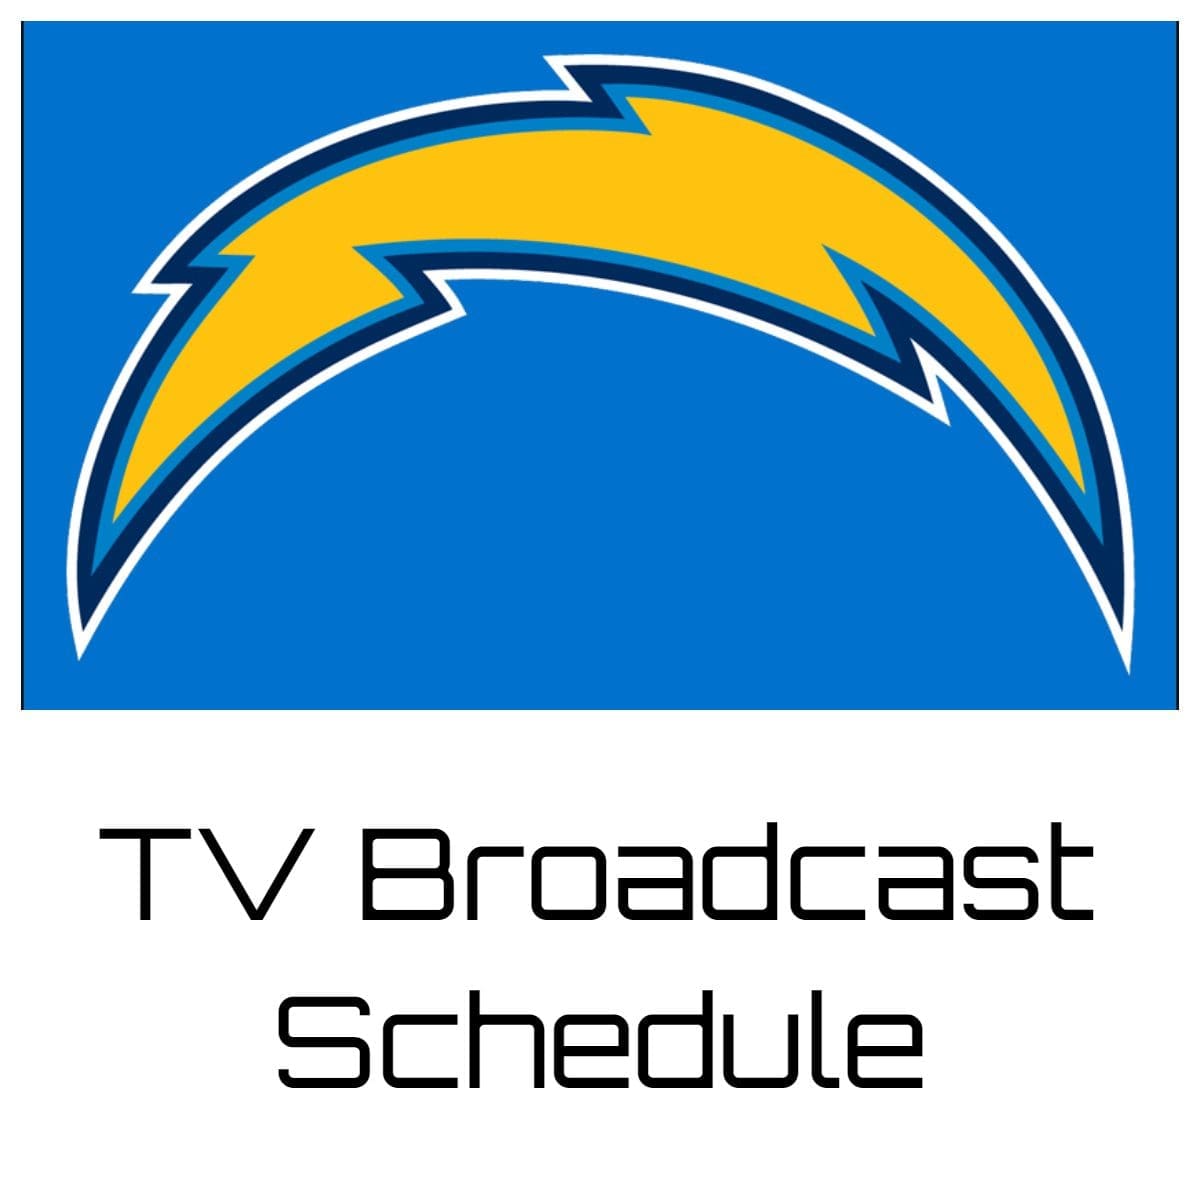 Los Angeles Chargers TV Broadcast Schedule